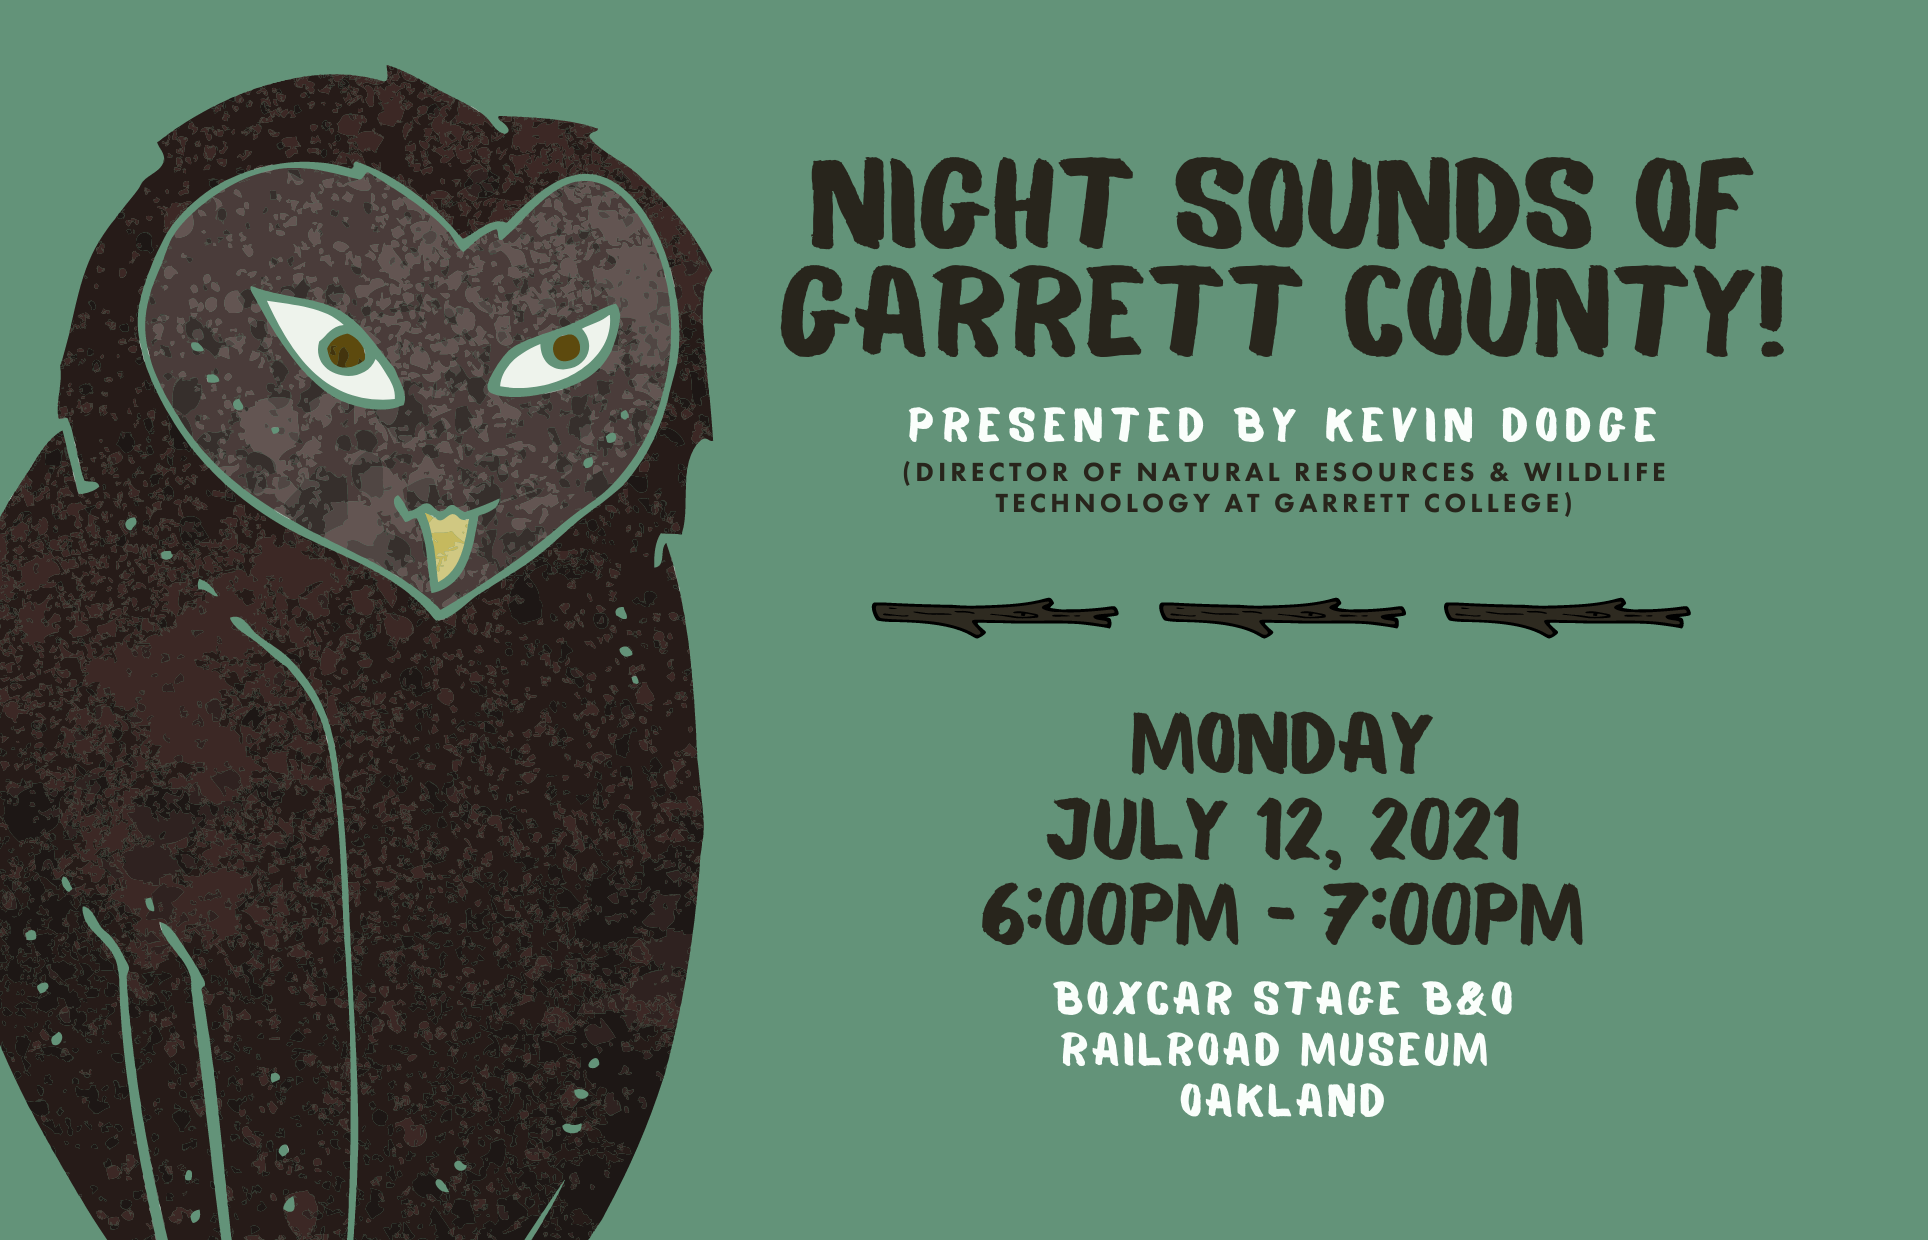 Night Sounds of Garrett County  - Presented by Kevin Dodge